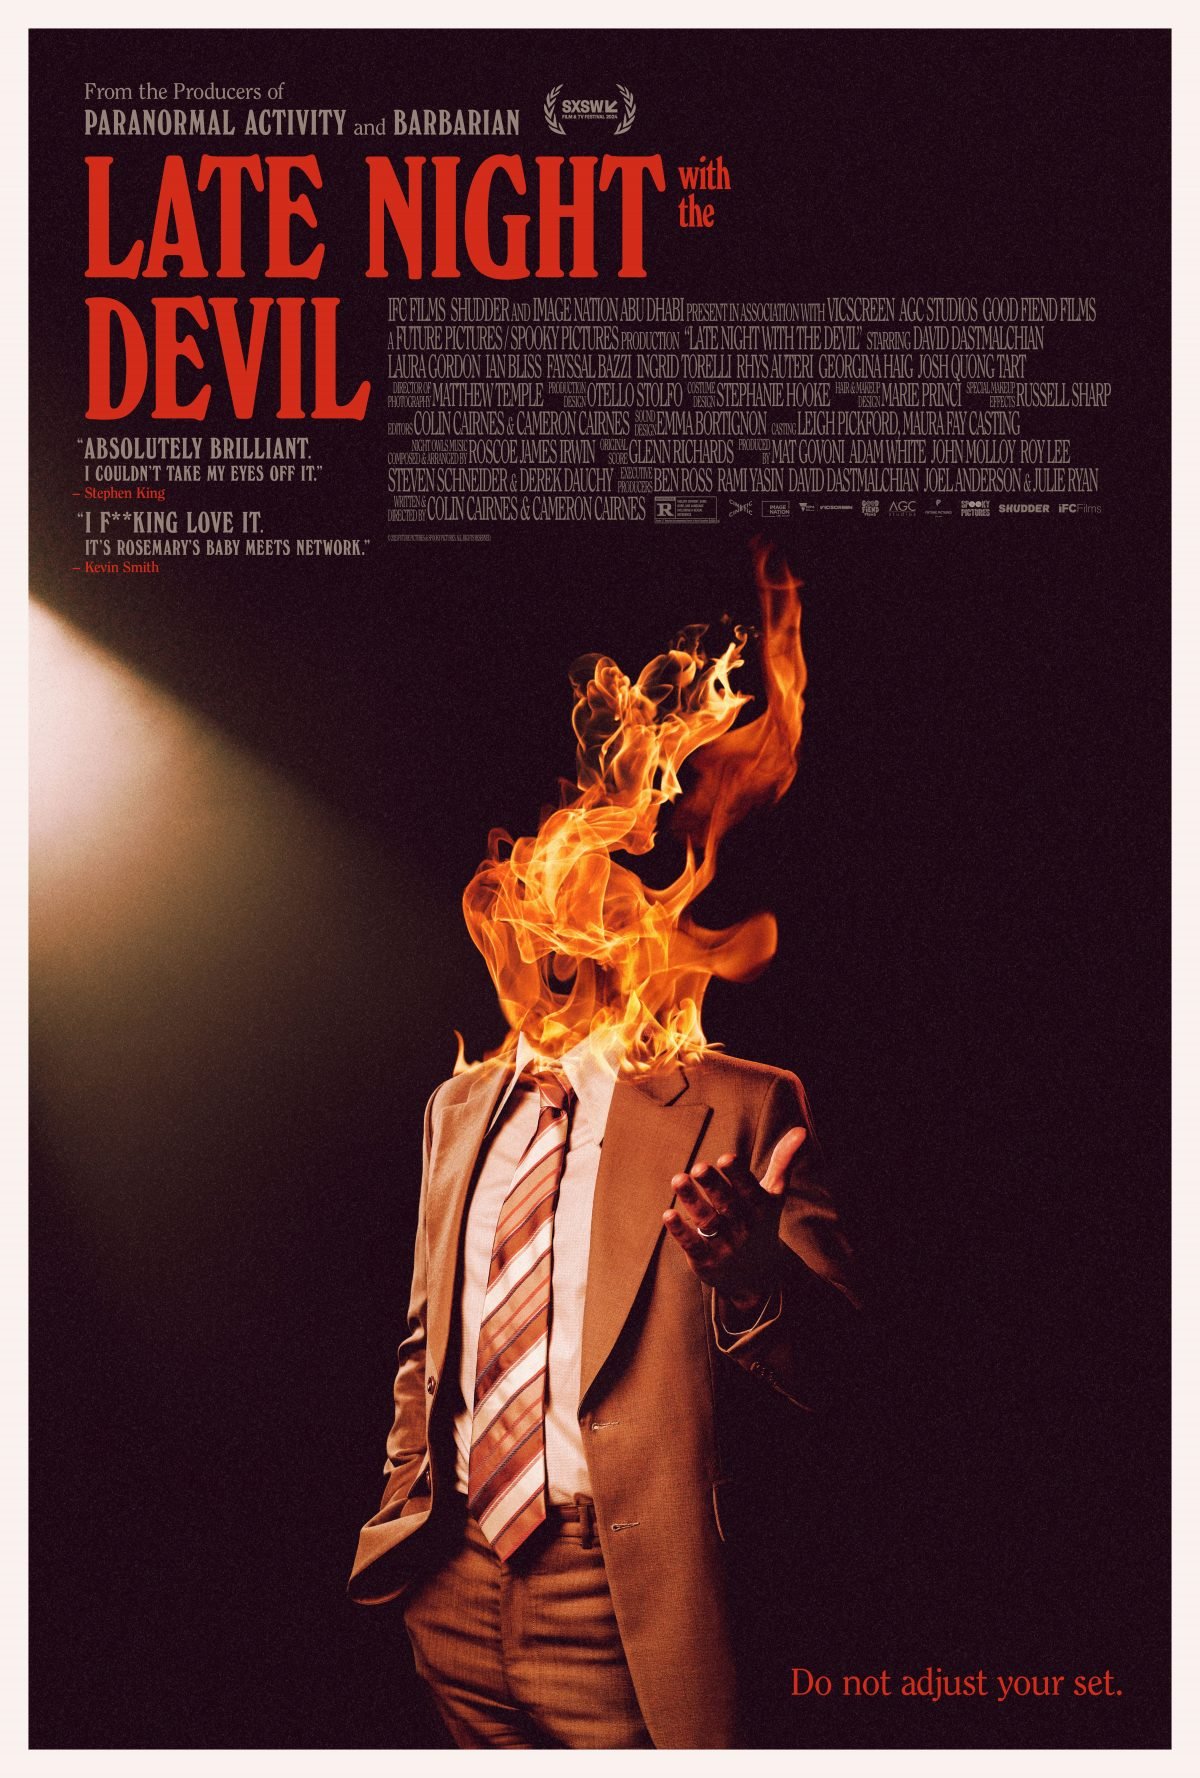 Late Night with the Devil poster showing a man in a suit with fire instead of a head